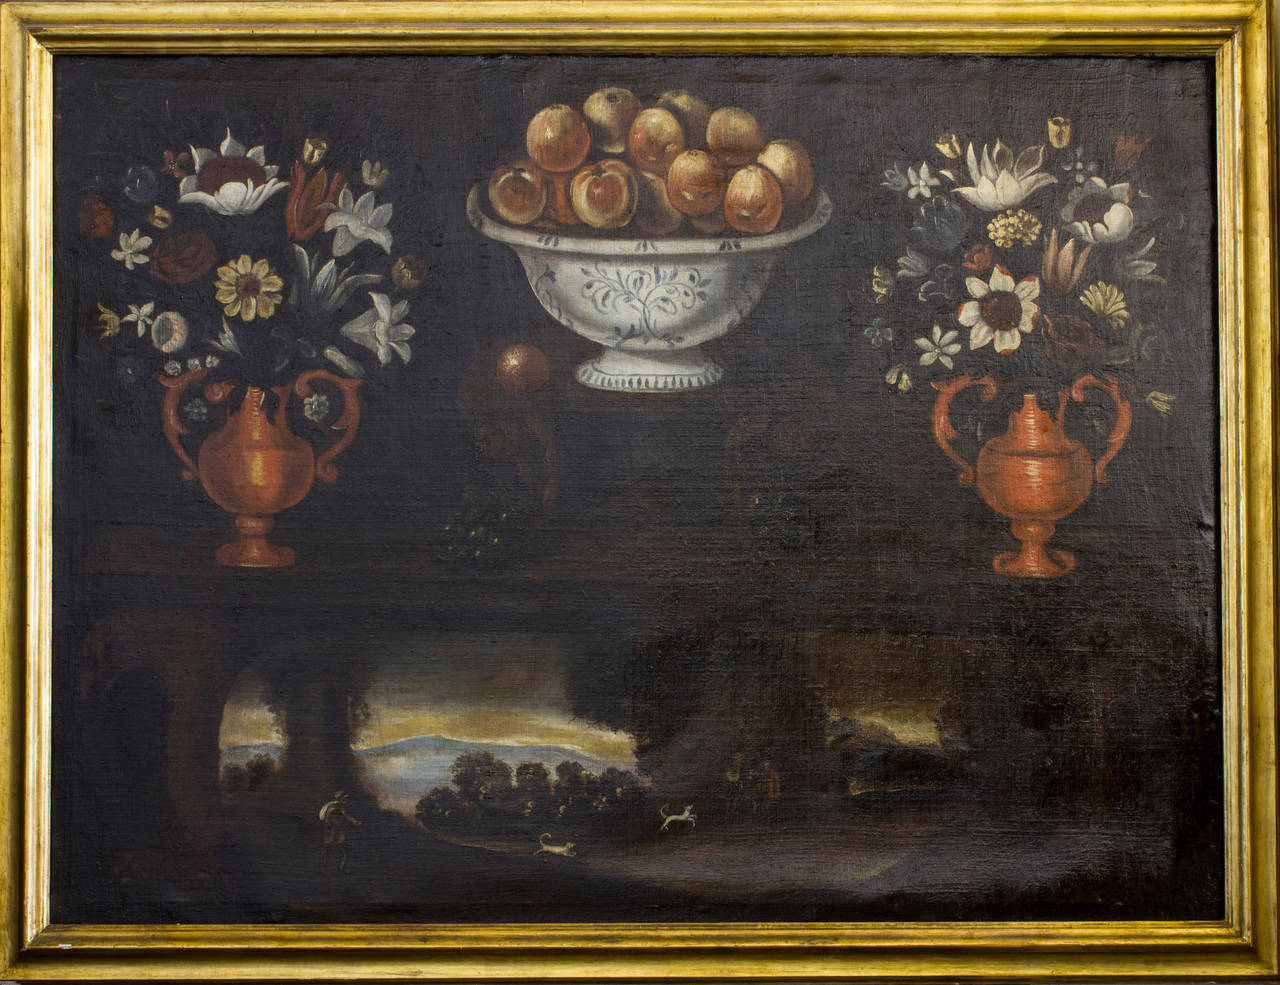 Still life with hunting scene. Attributed to Antonio Lagos, 17th century, Portugal. Oil on canvas painting.